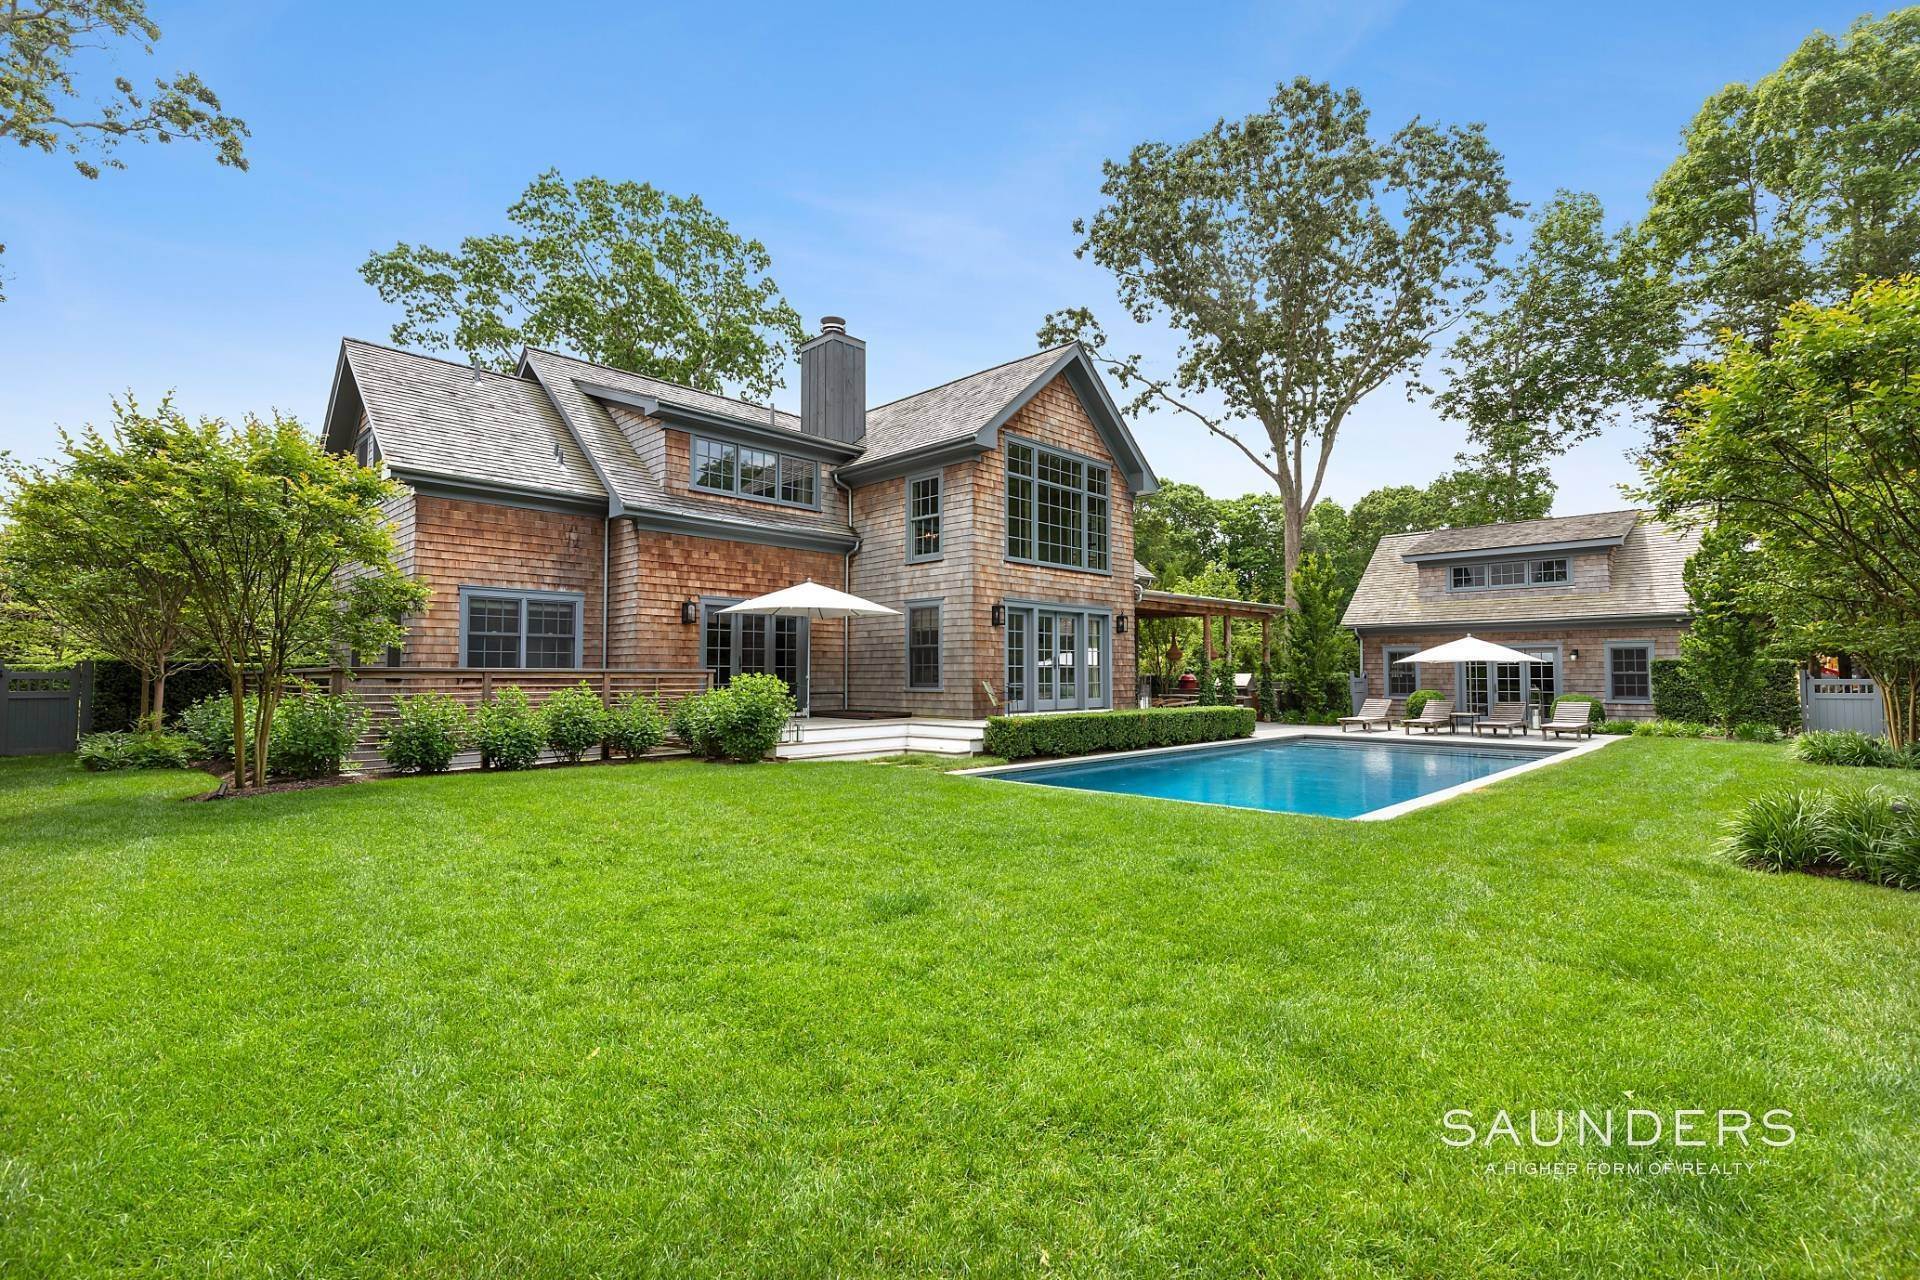 2. Single Family Homes for Sale at On A Level All Its Own 65 Buell Lane Extension, East Hampton, NY 11937